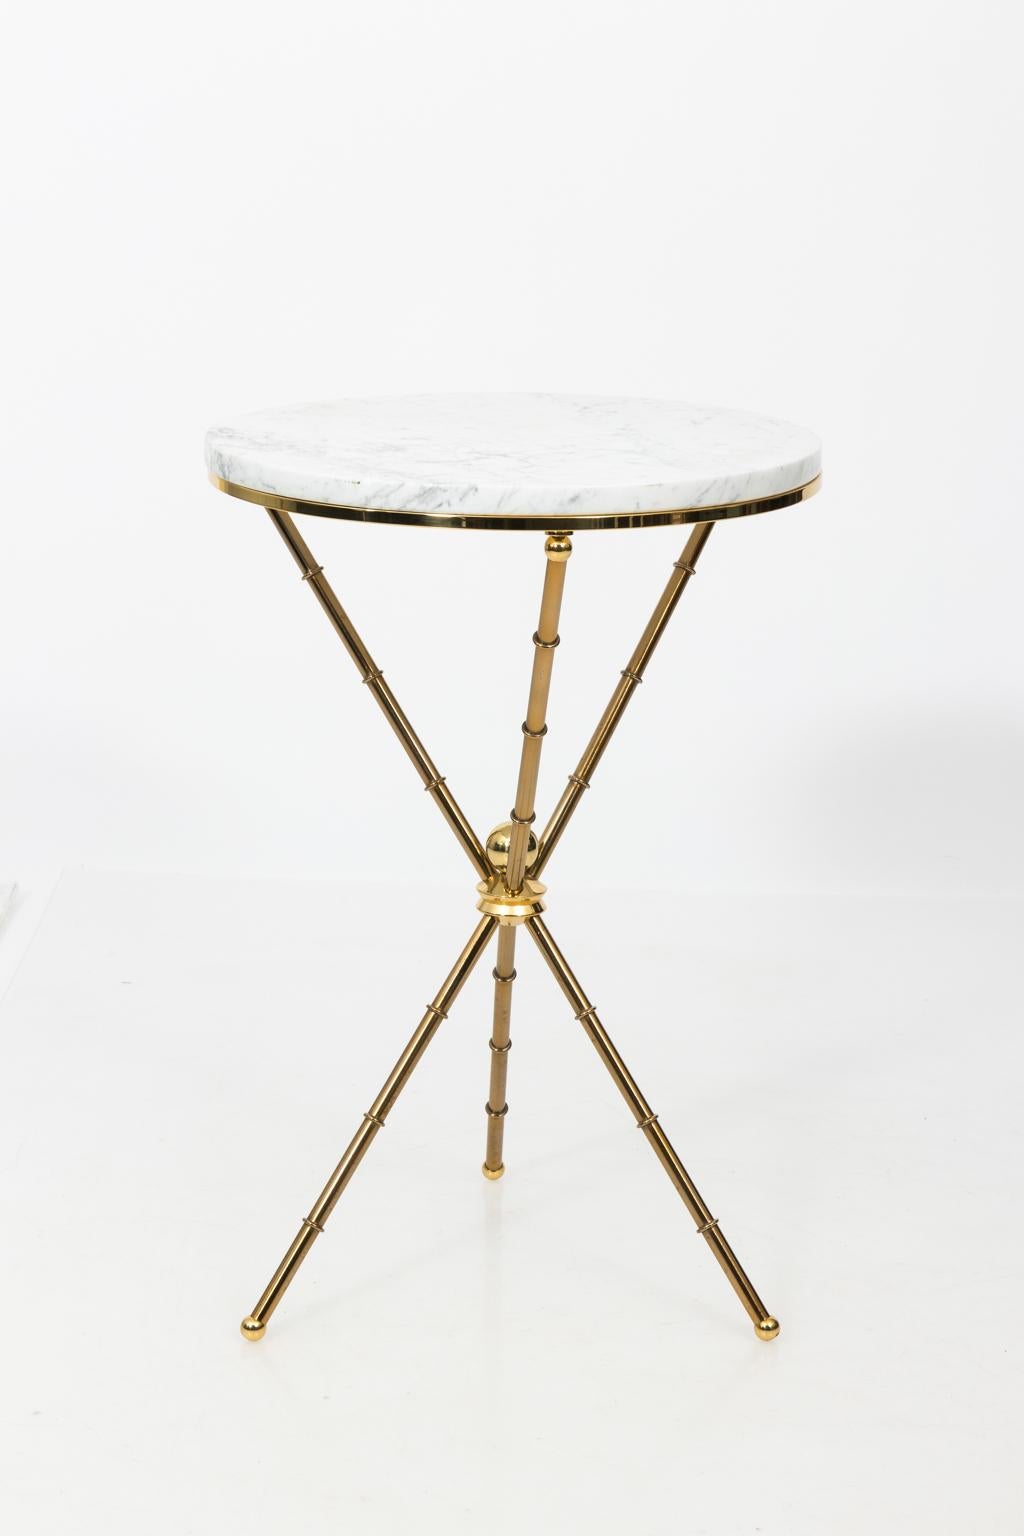 Italian faux bamboo side table with a marble top and tripod base, circa mid-20th century.